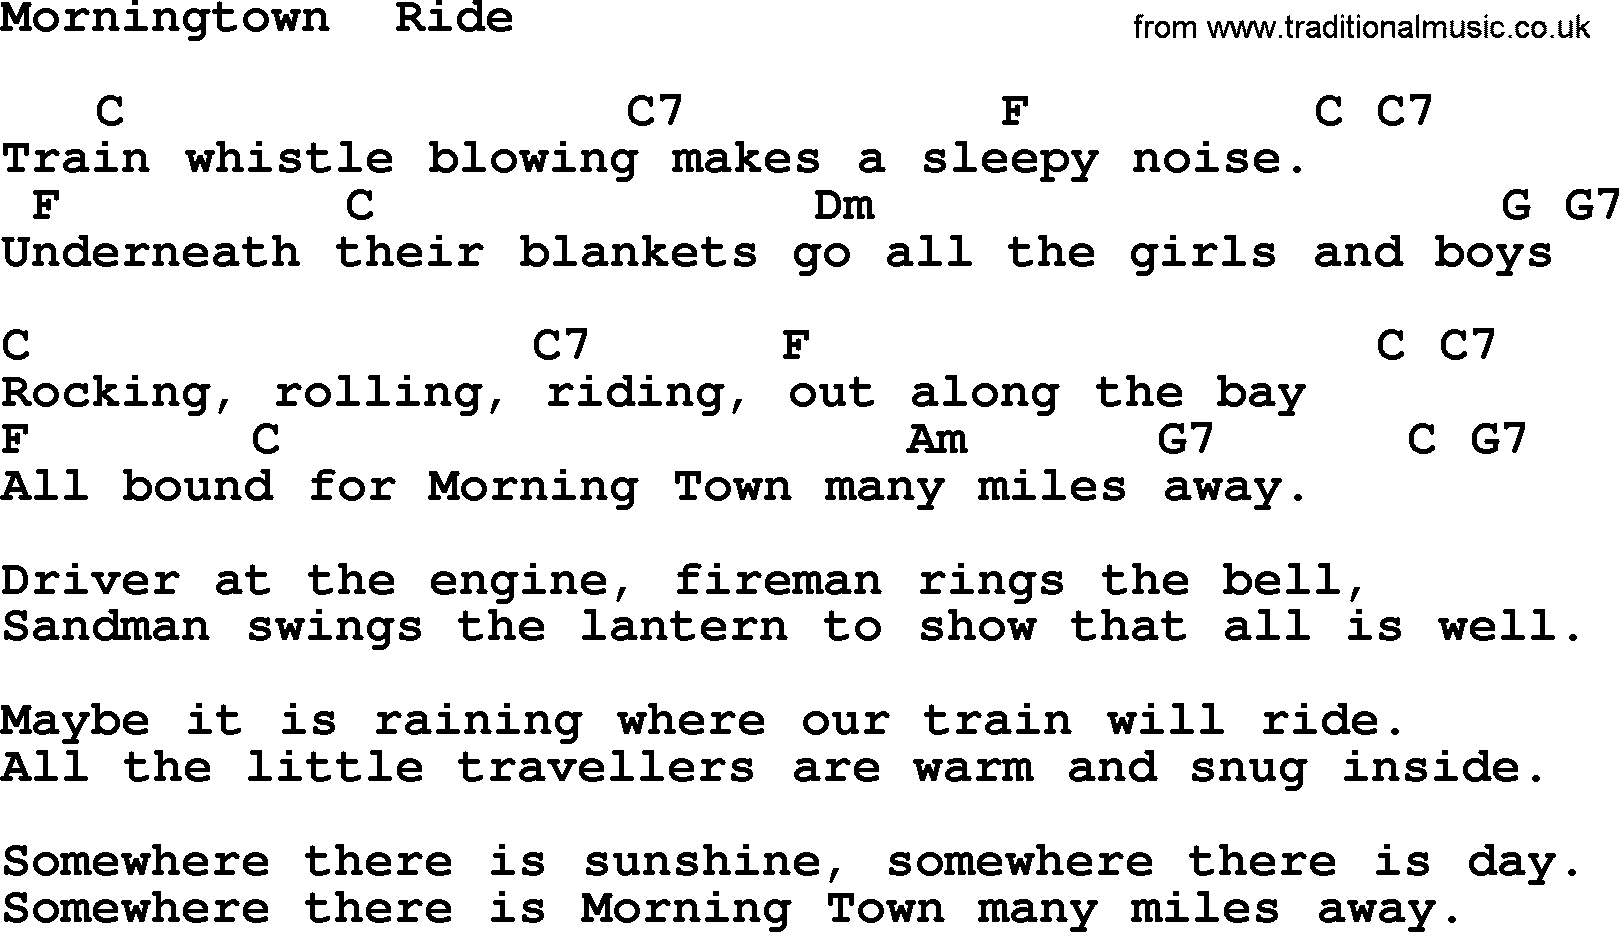 Pete Seeger song Morningtown  Ride, lyrics and chords